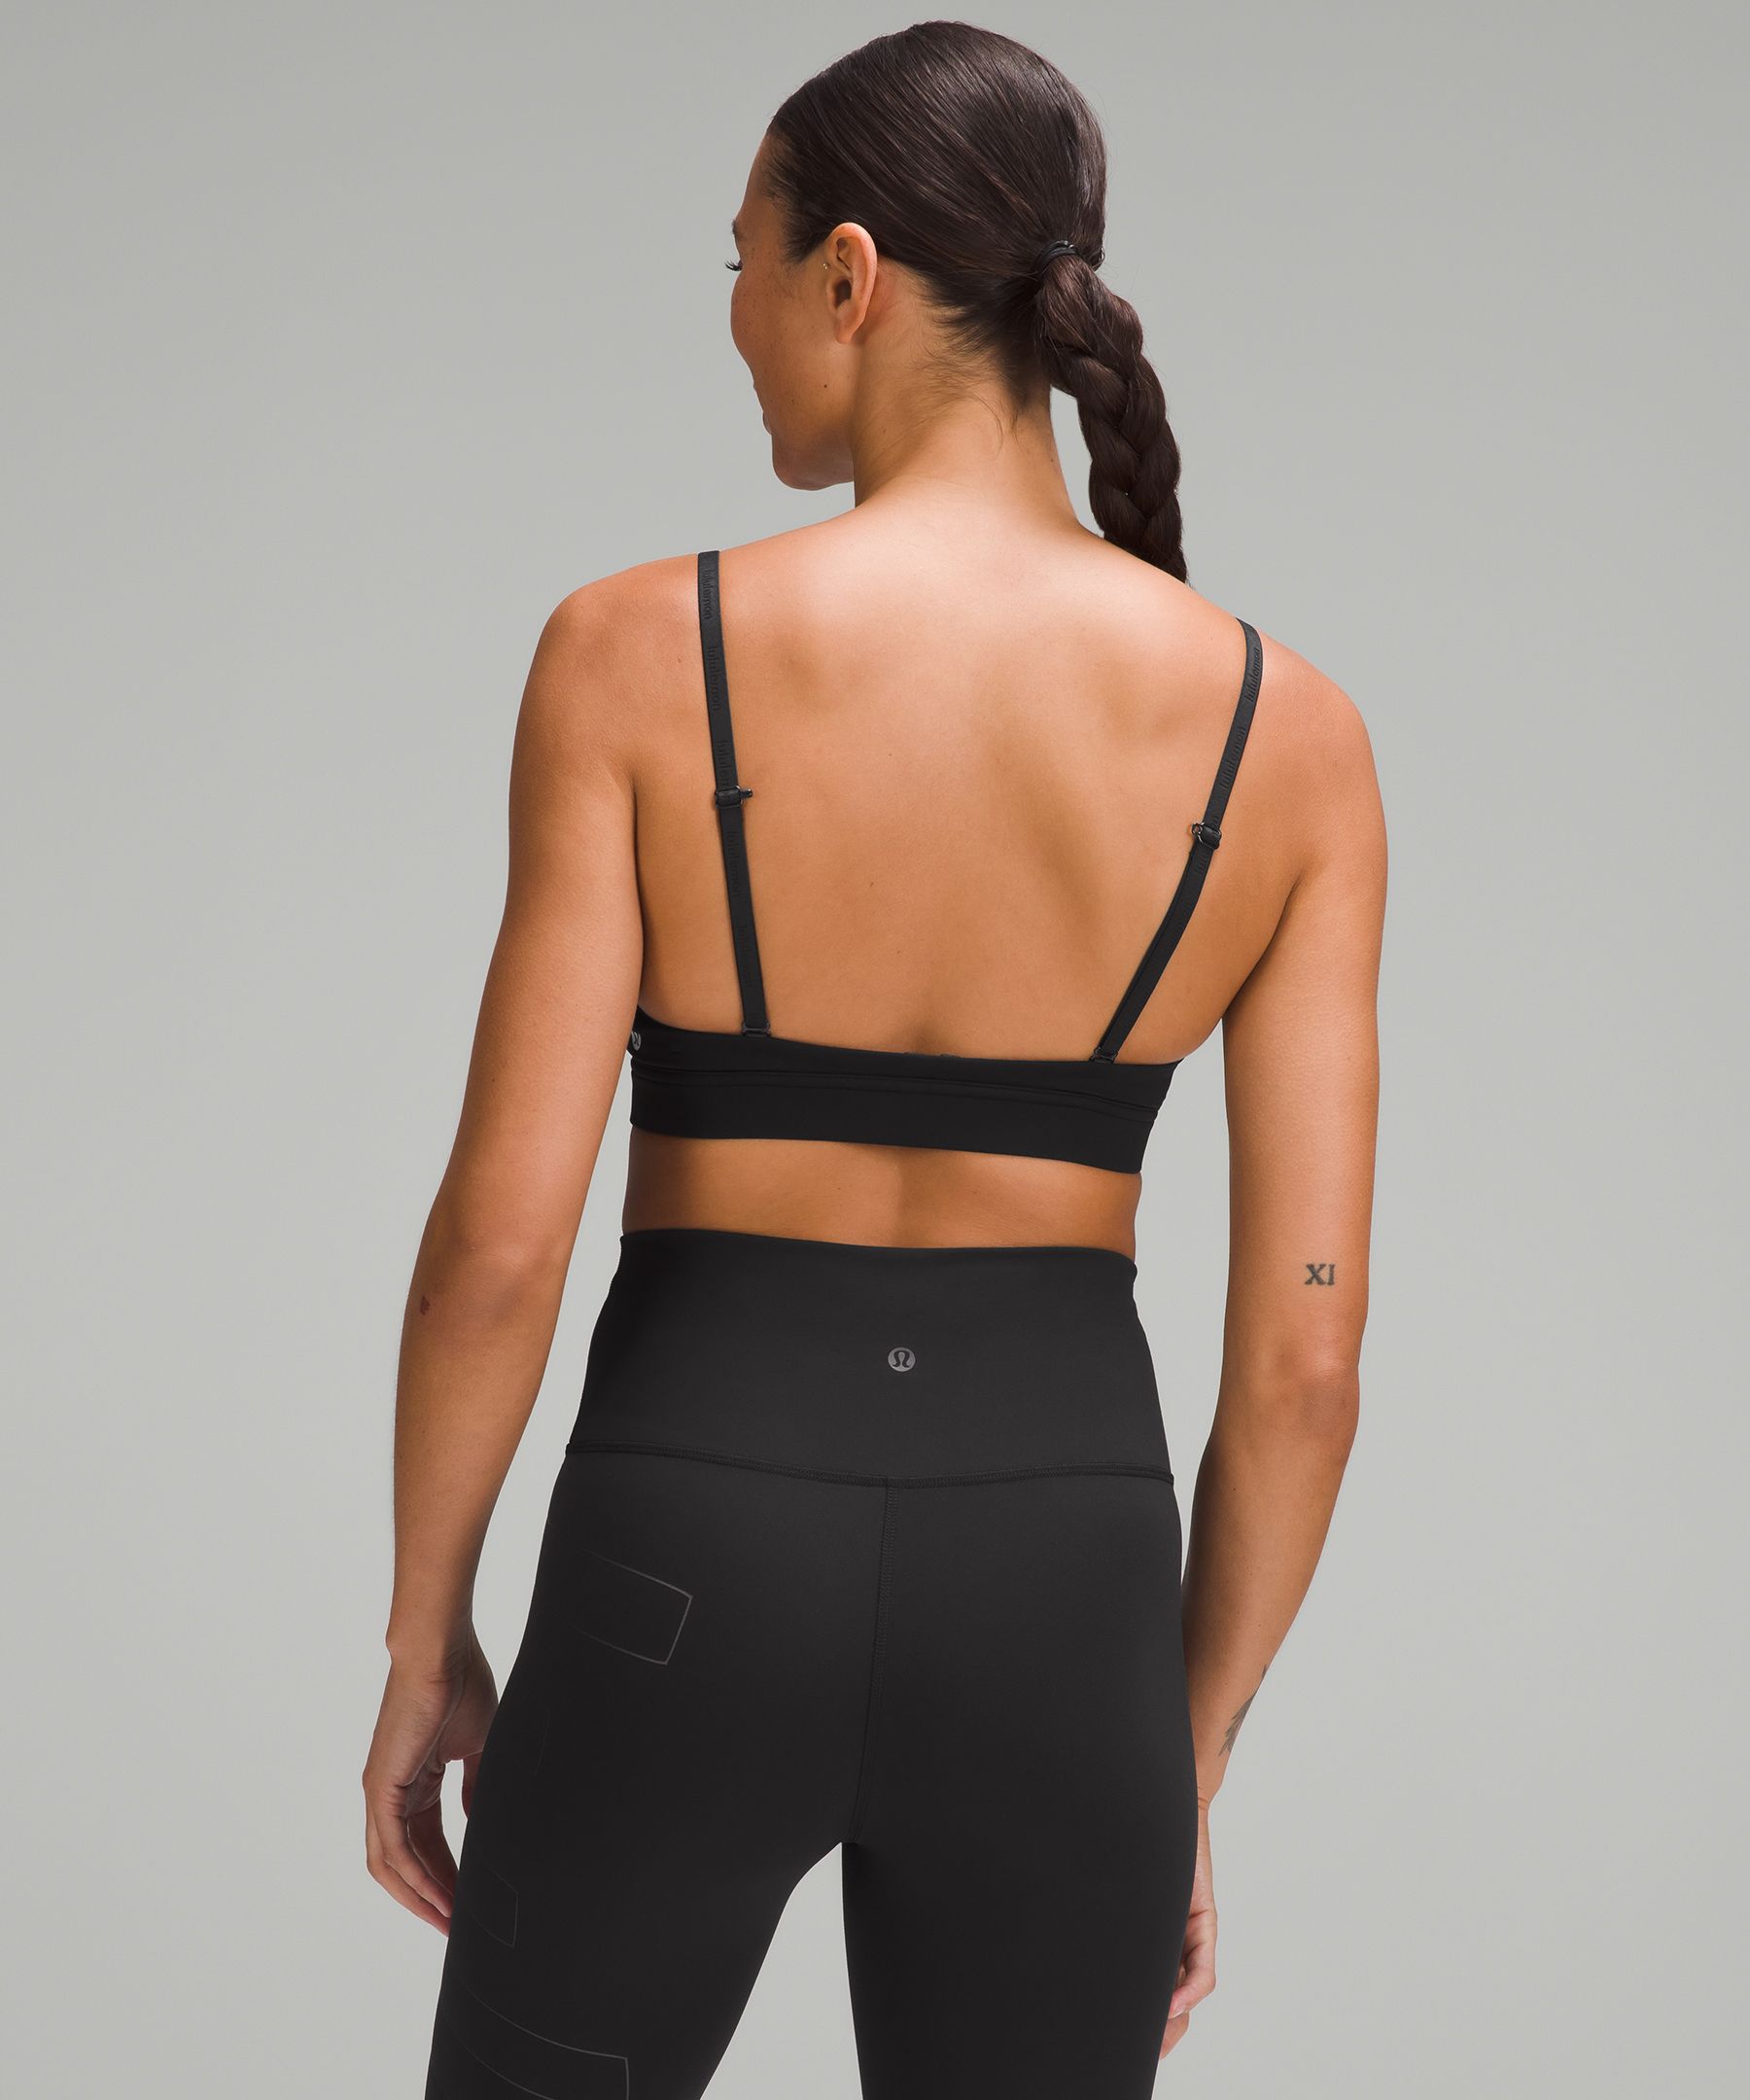 License to Train Triangle Bra Light Support, A/B Cup : r/lululemon